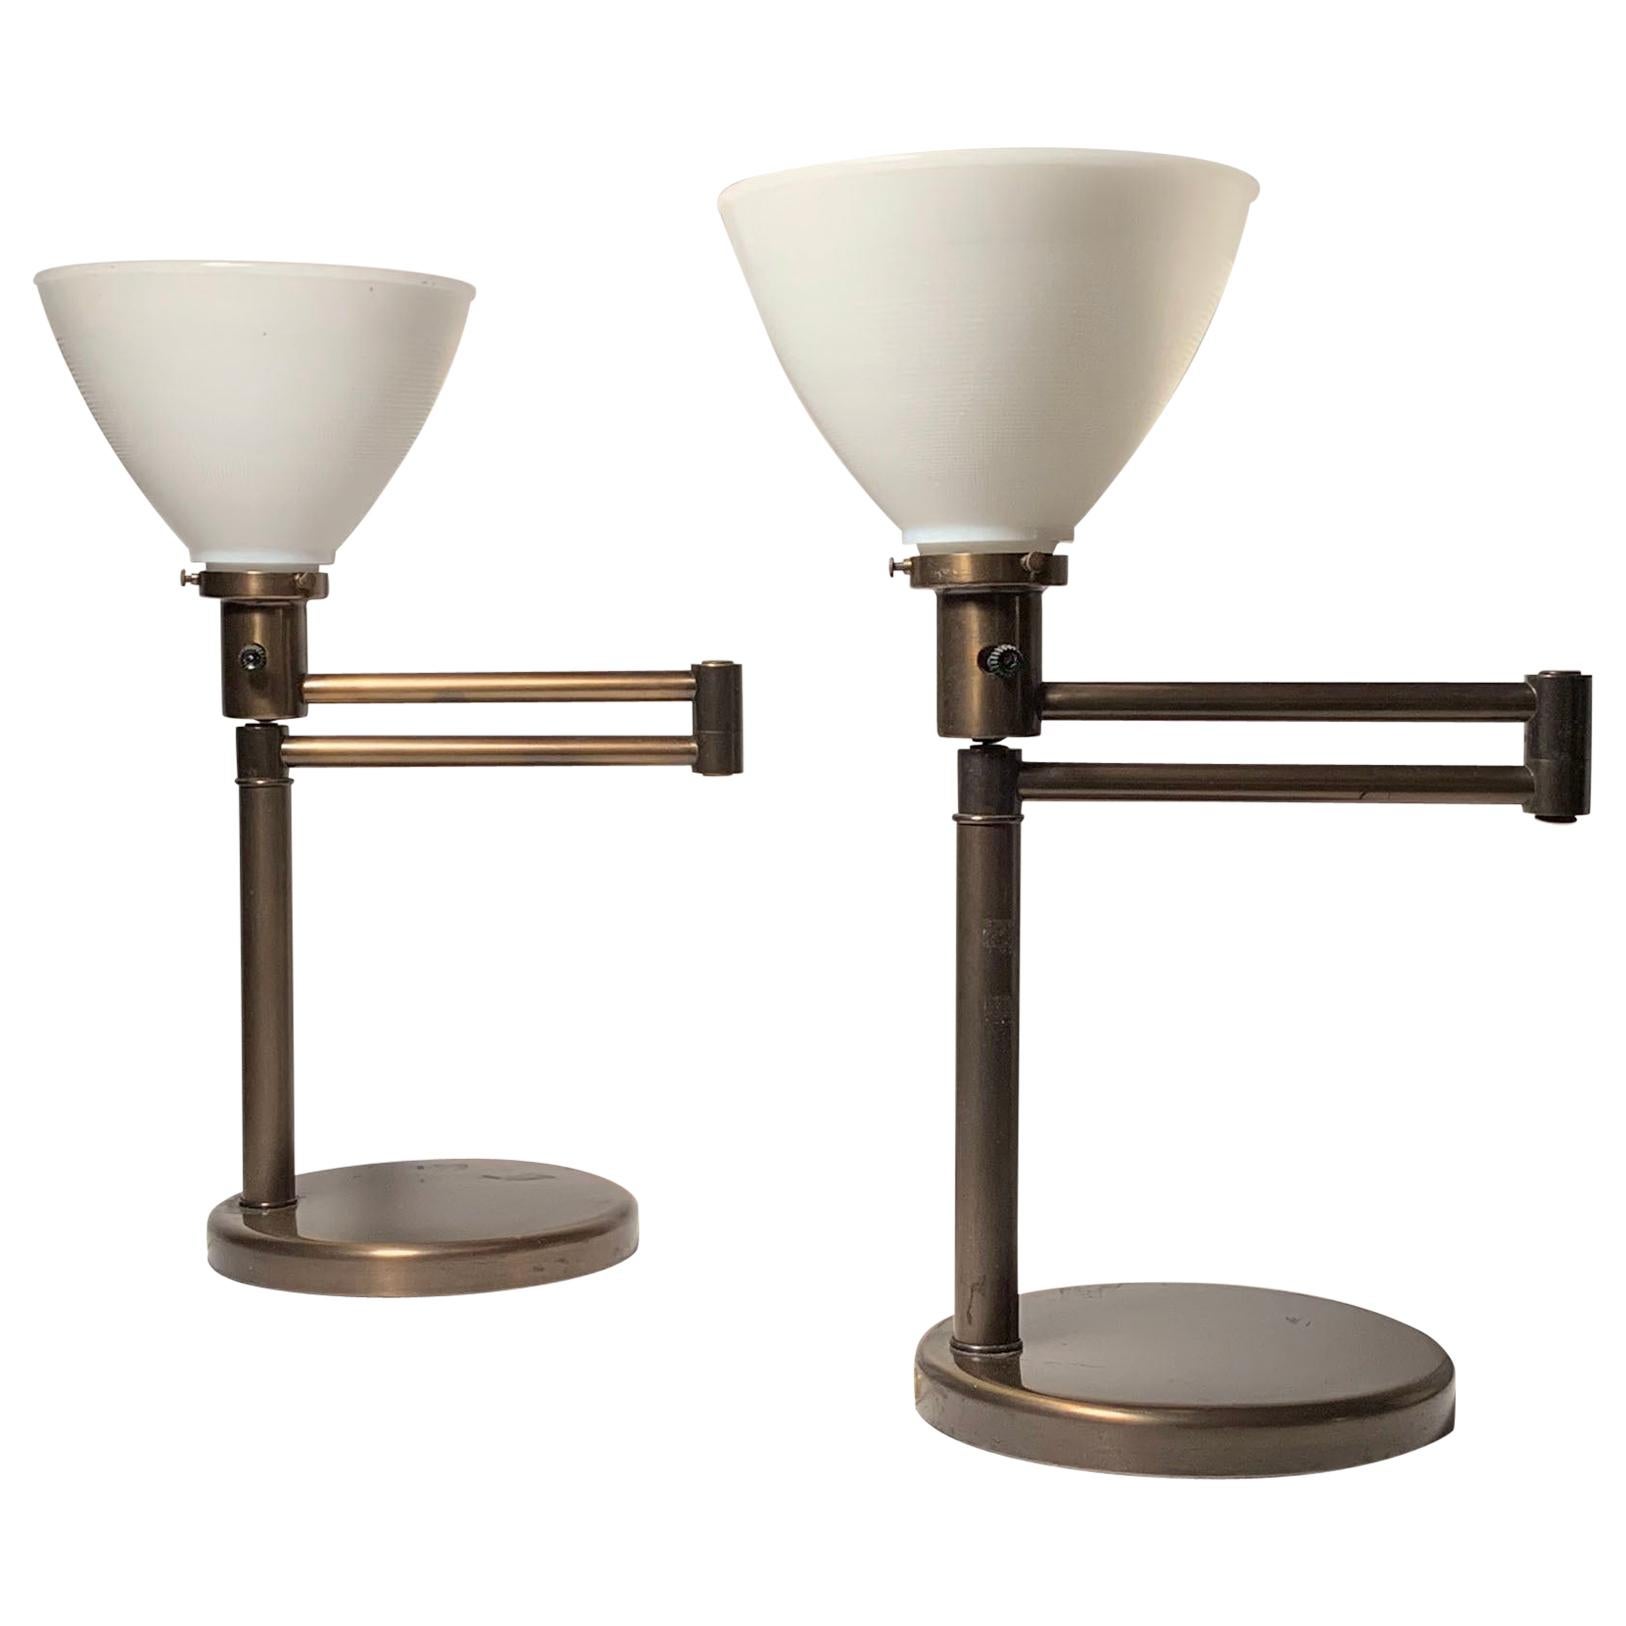 Pair of Walter Von Nessen Vintage Swing Arm Table Lamps in Bronze Finish